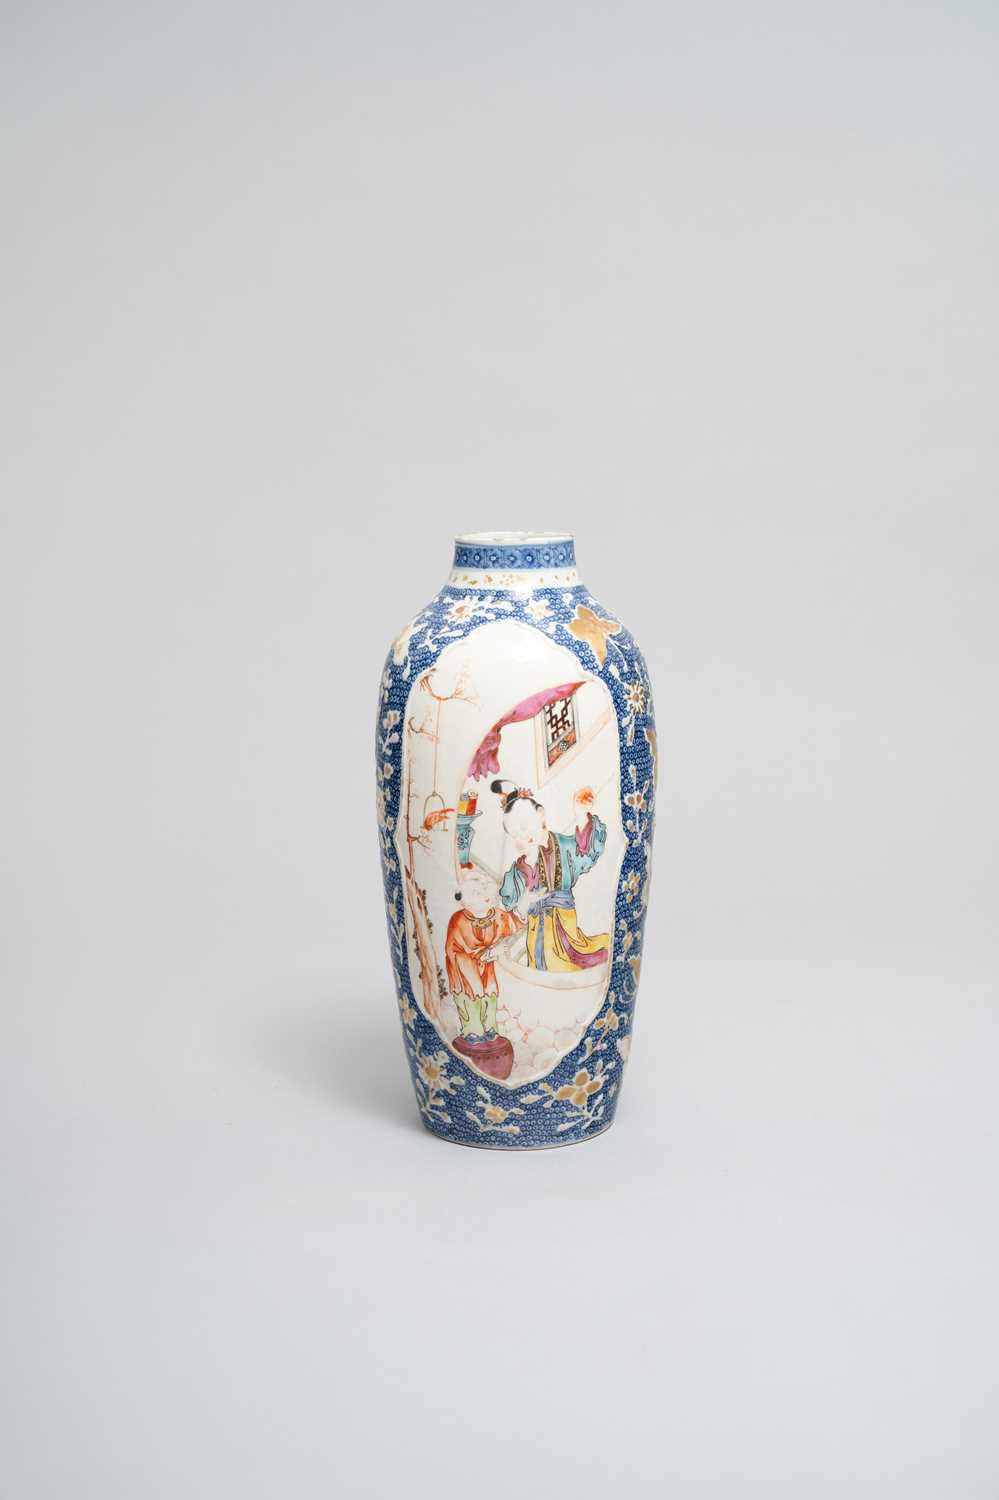 NO RESERVE A CHINESE FAMILLE ROSE SOFT PASTE LANTERN VASE QIANLONG 1736-95 Painted with shaped